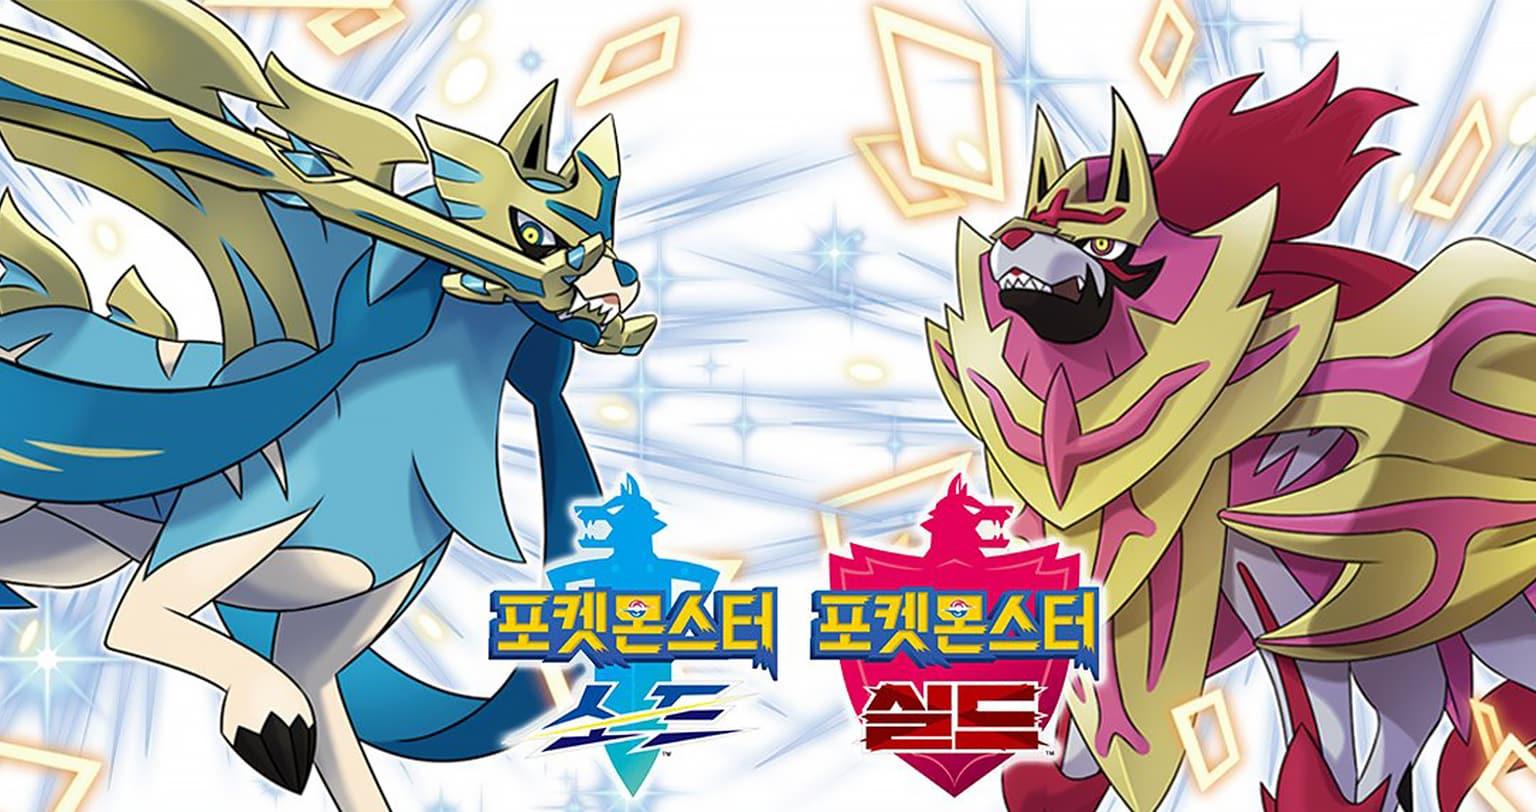 A Second Zarude Form Will Soon Be Distributed To Pokémon ﻿Sword And Shield  Fans In Japan